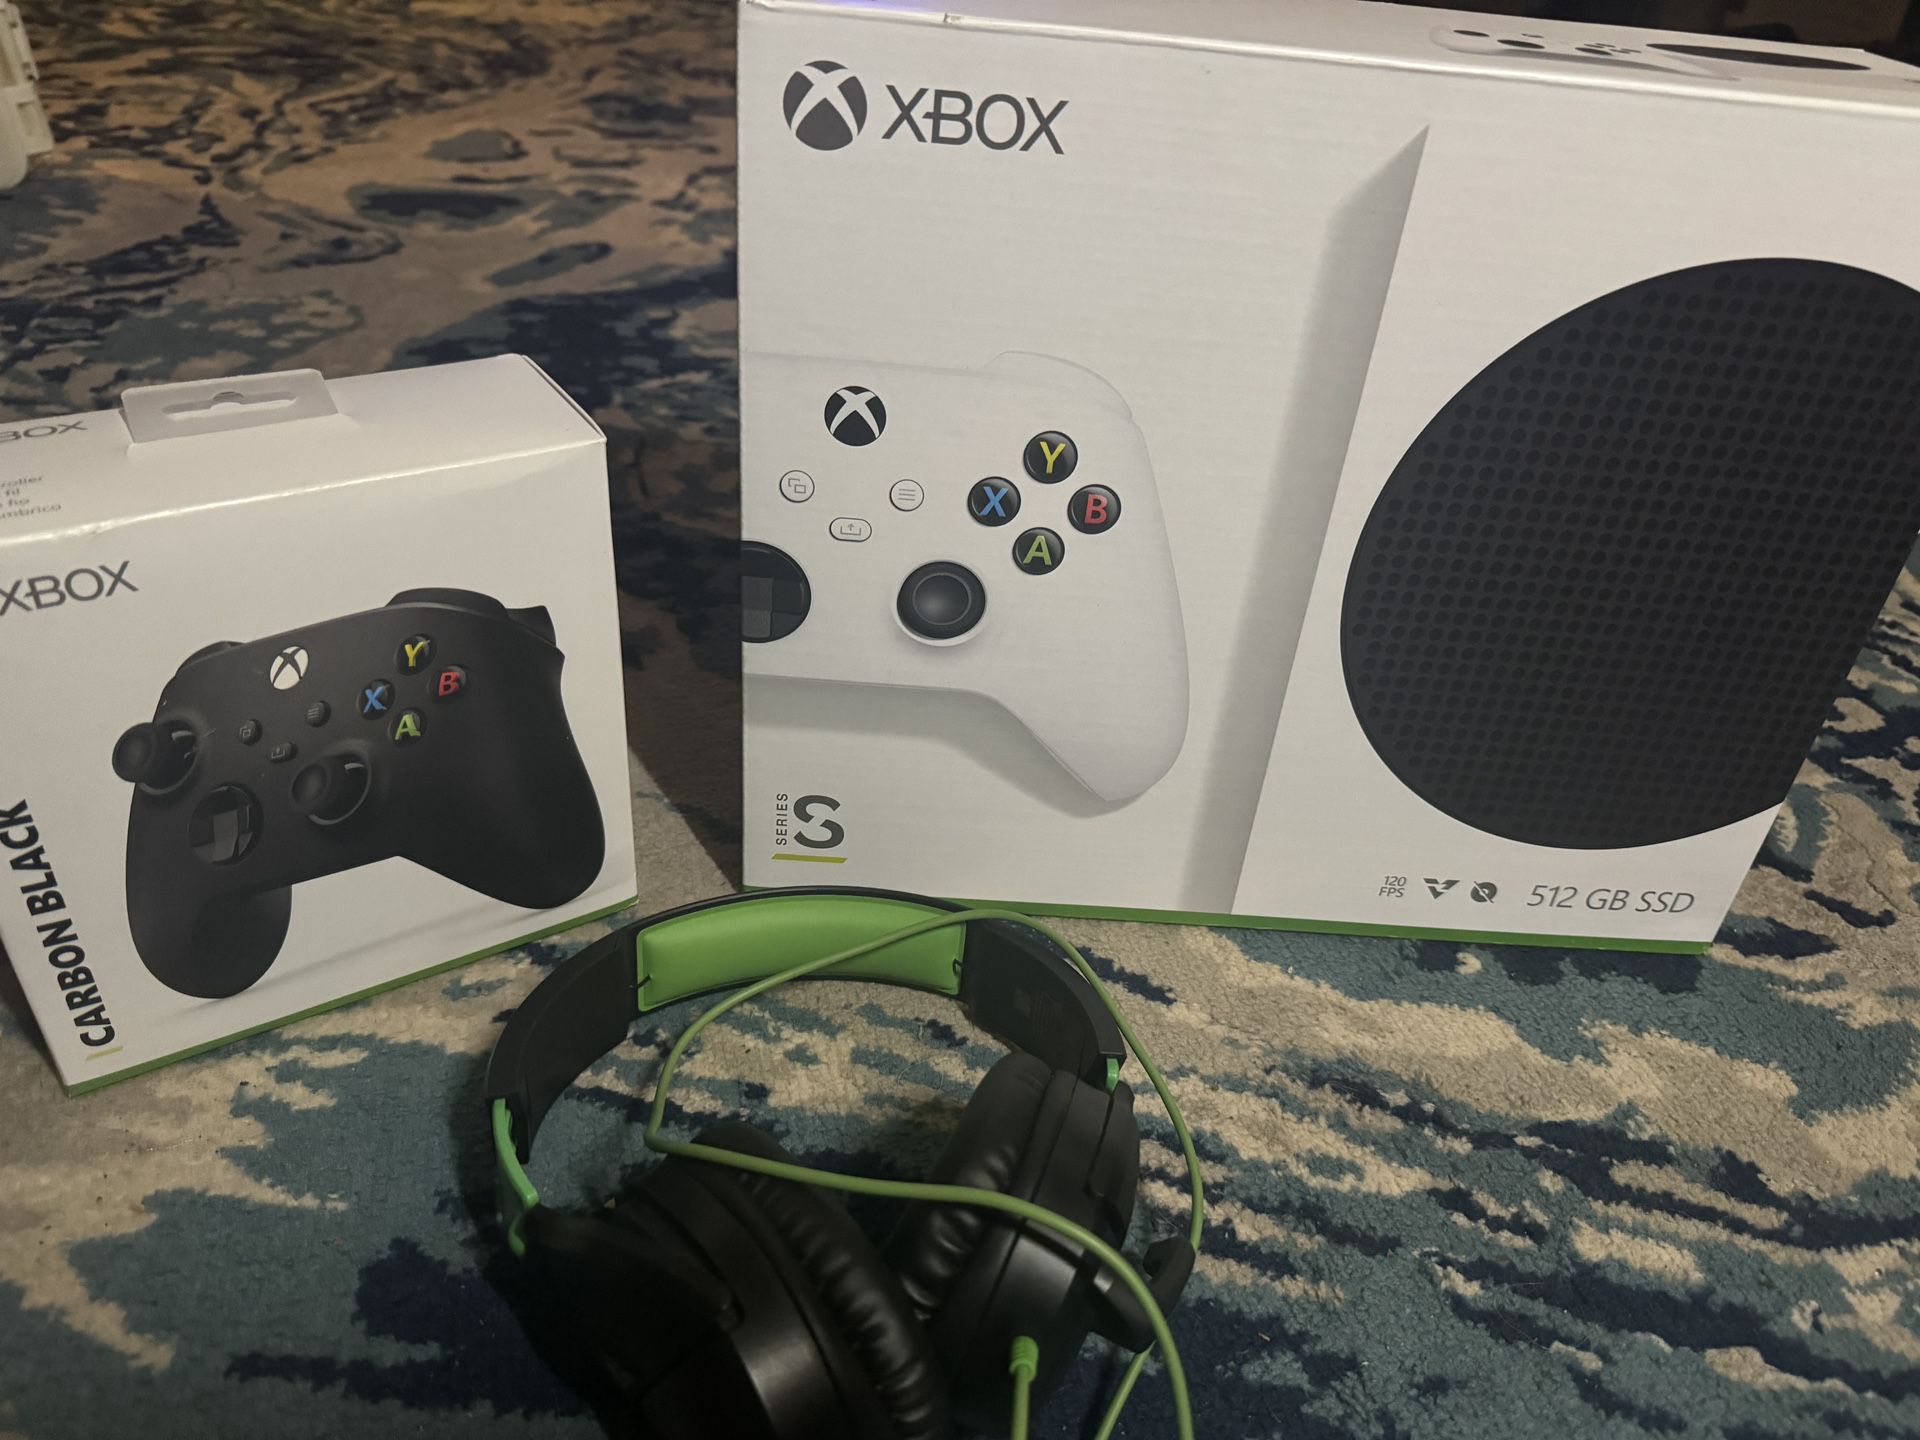 Xbox Series S And Headset!